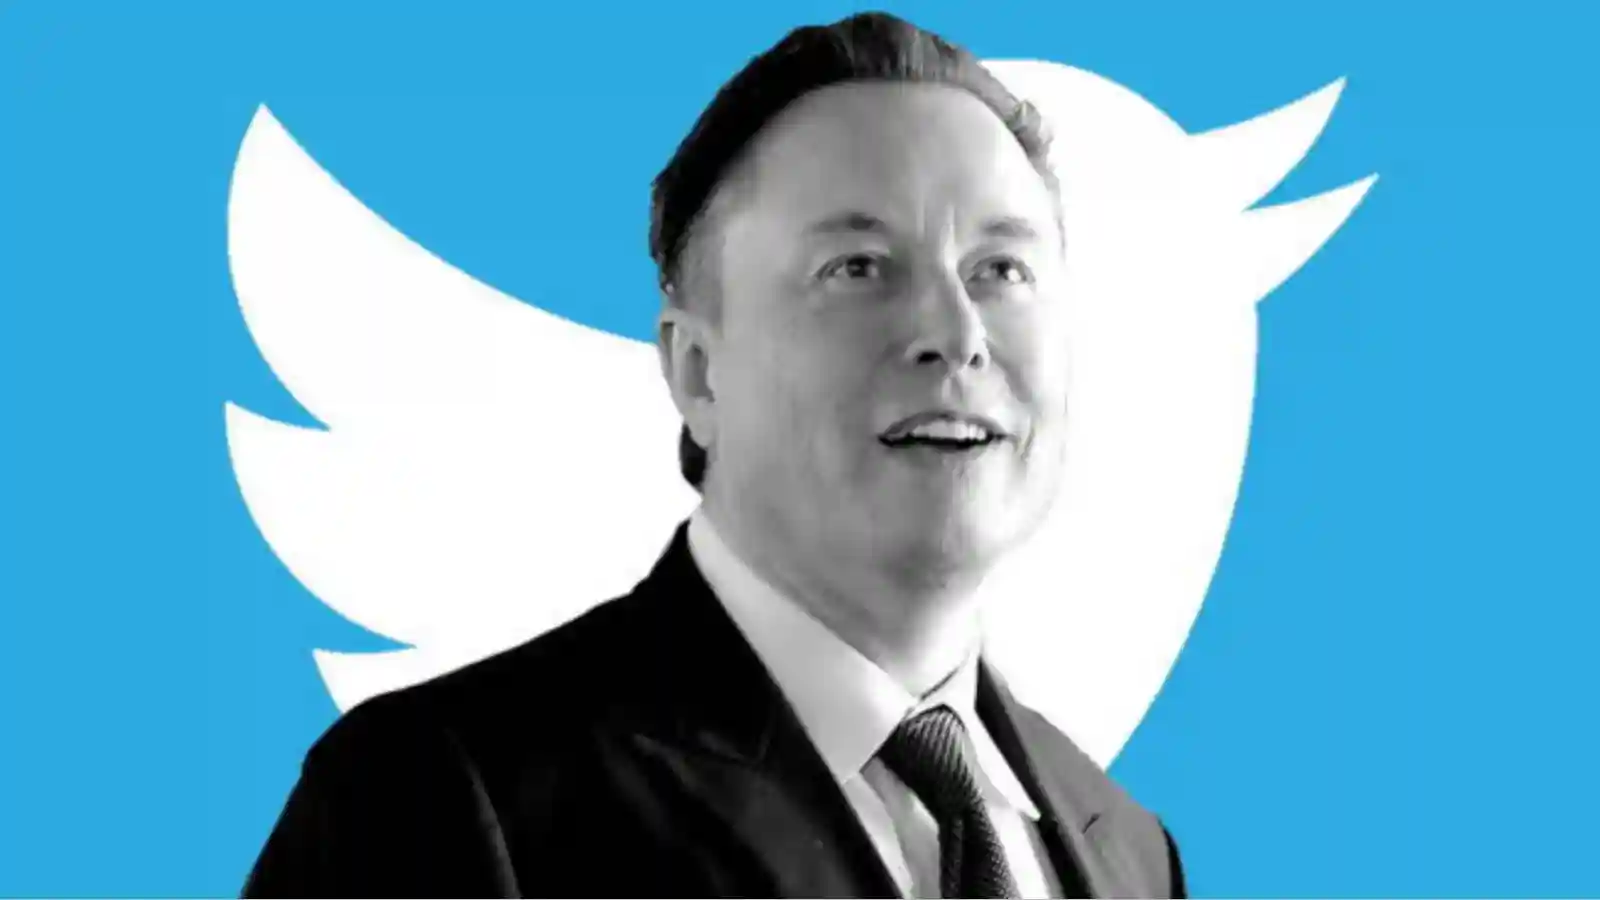 Elon Musk will restrict accounts pushing content from other platforms on Twitter